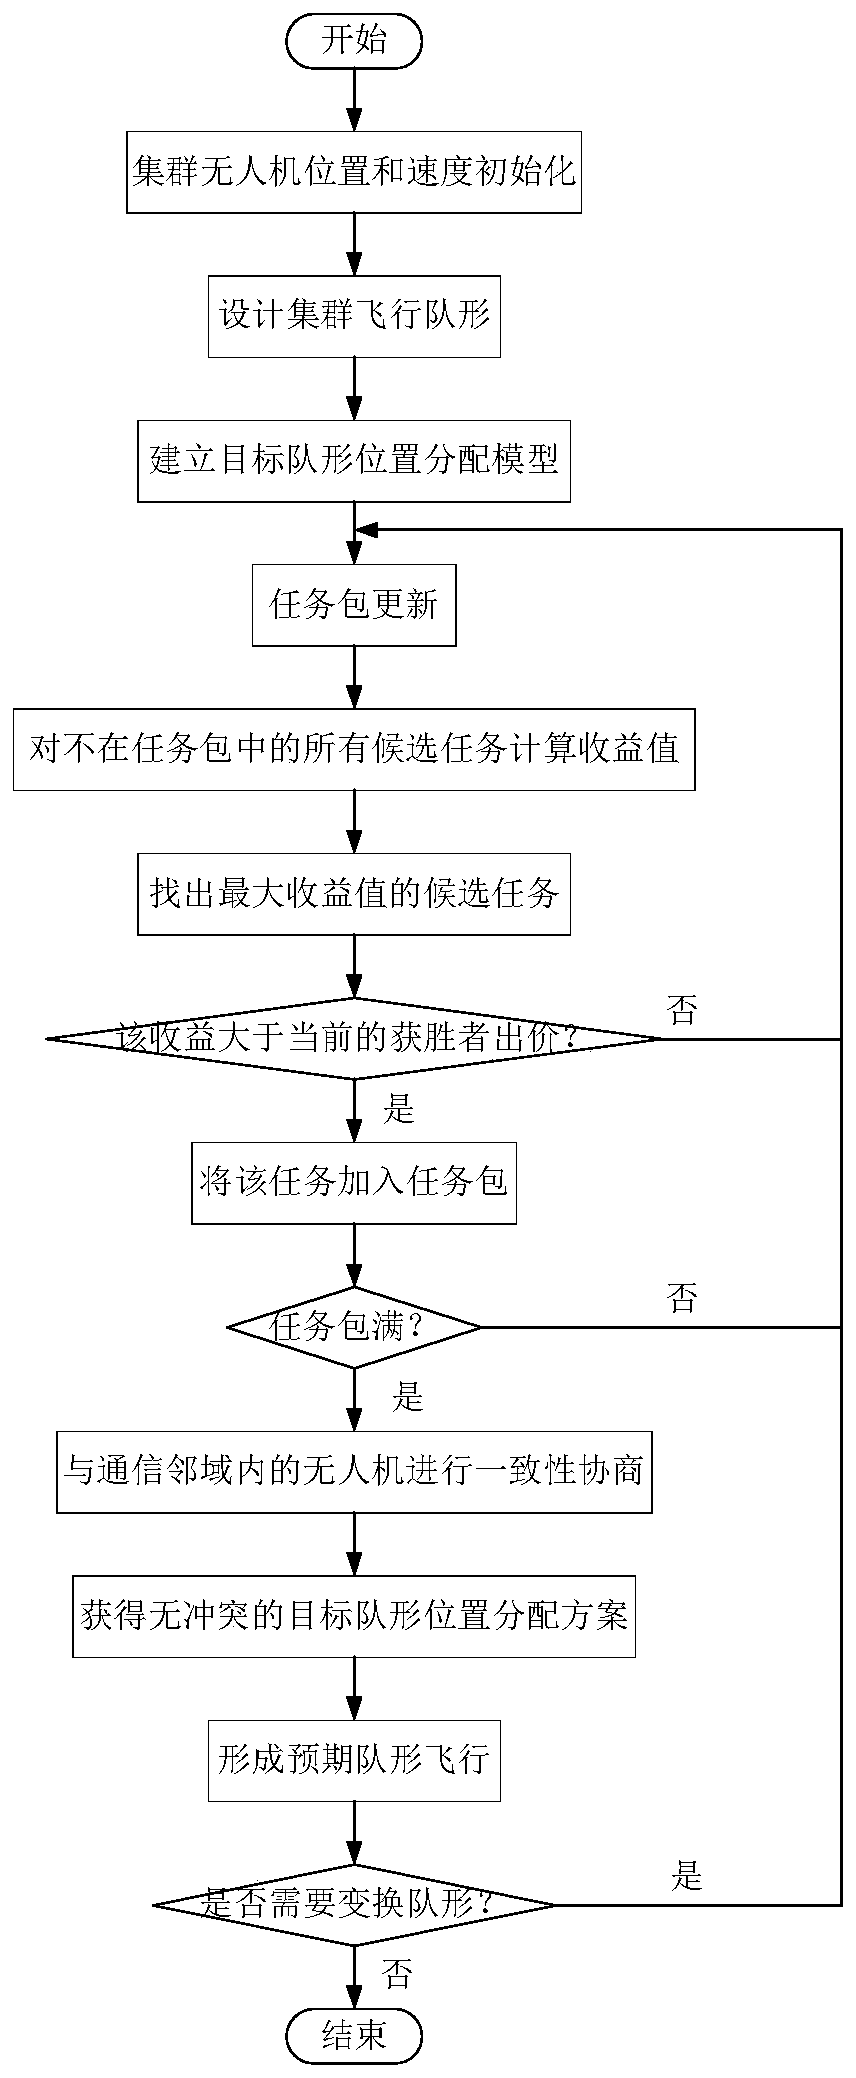 Distributed cluster unmanned aerial vehicle formation changing method